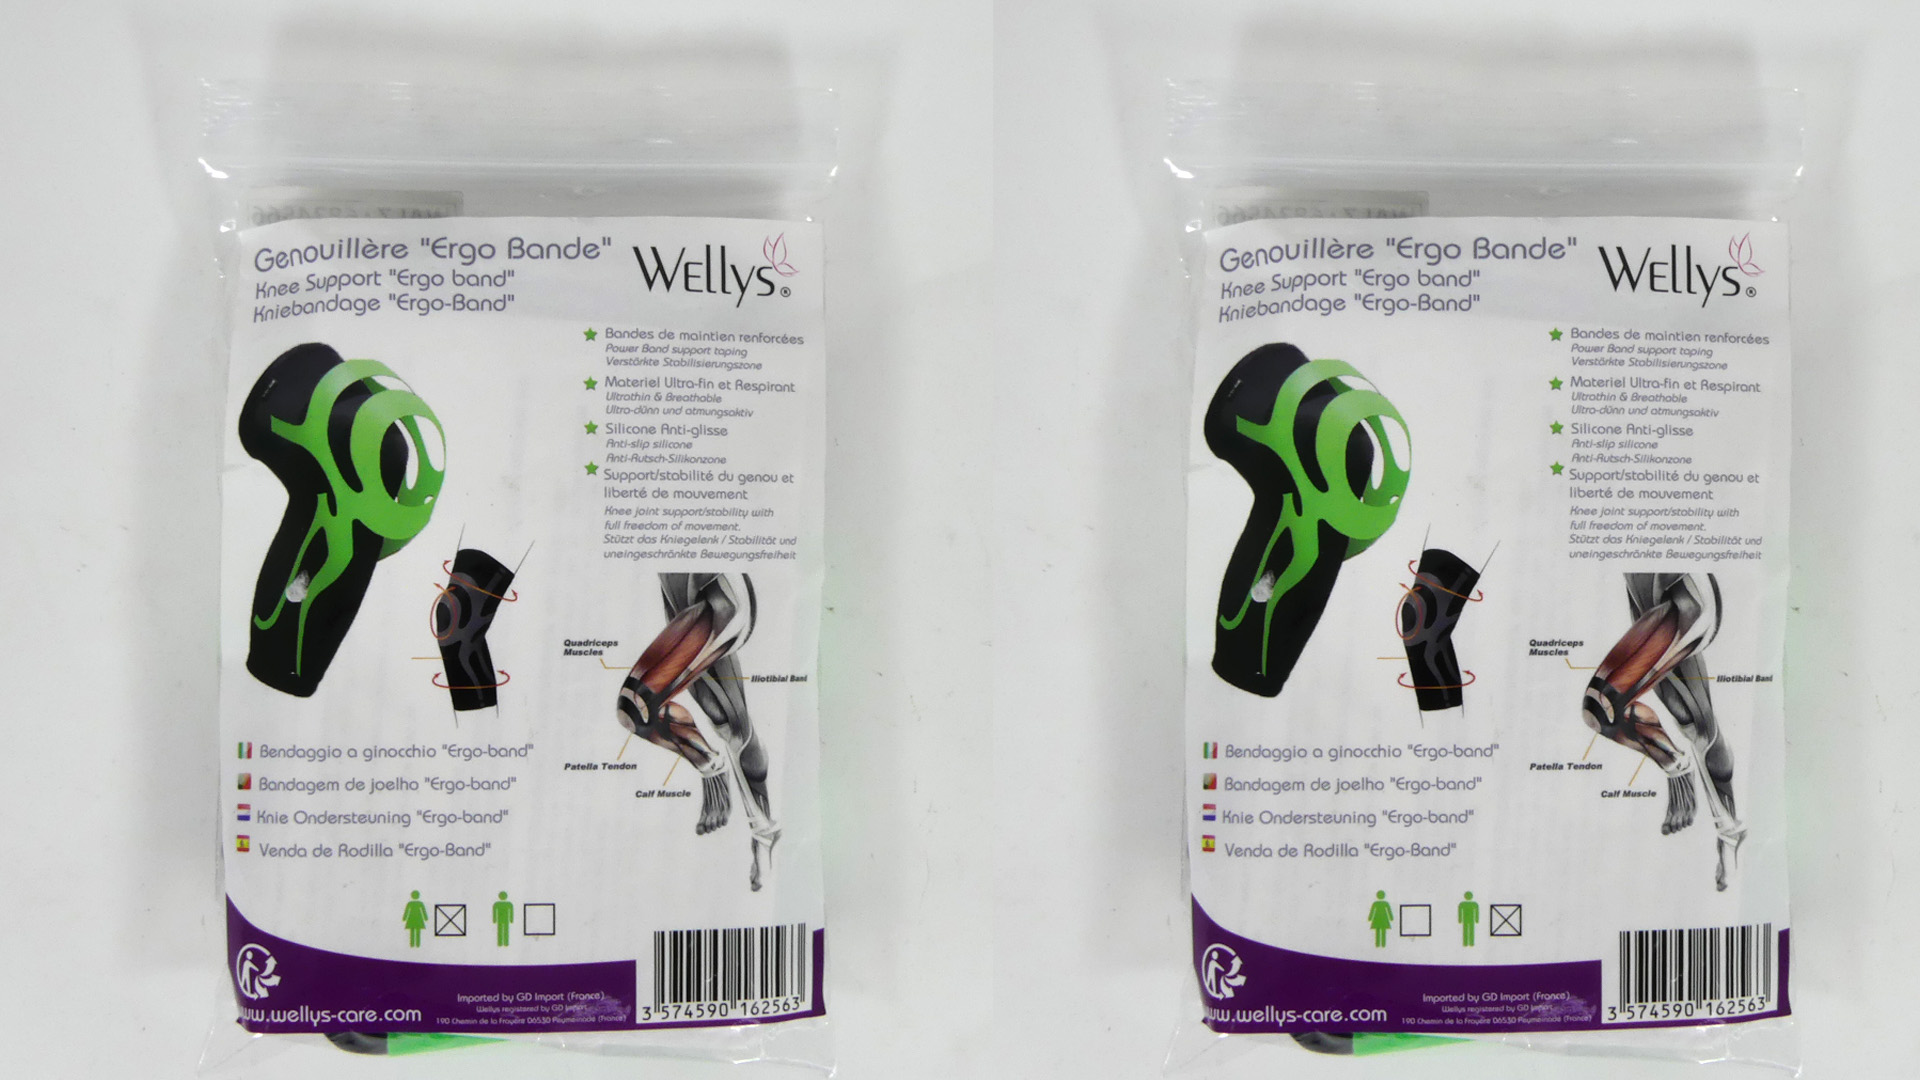 Wellys Knee Support "Ergo band" (mujeres)